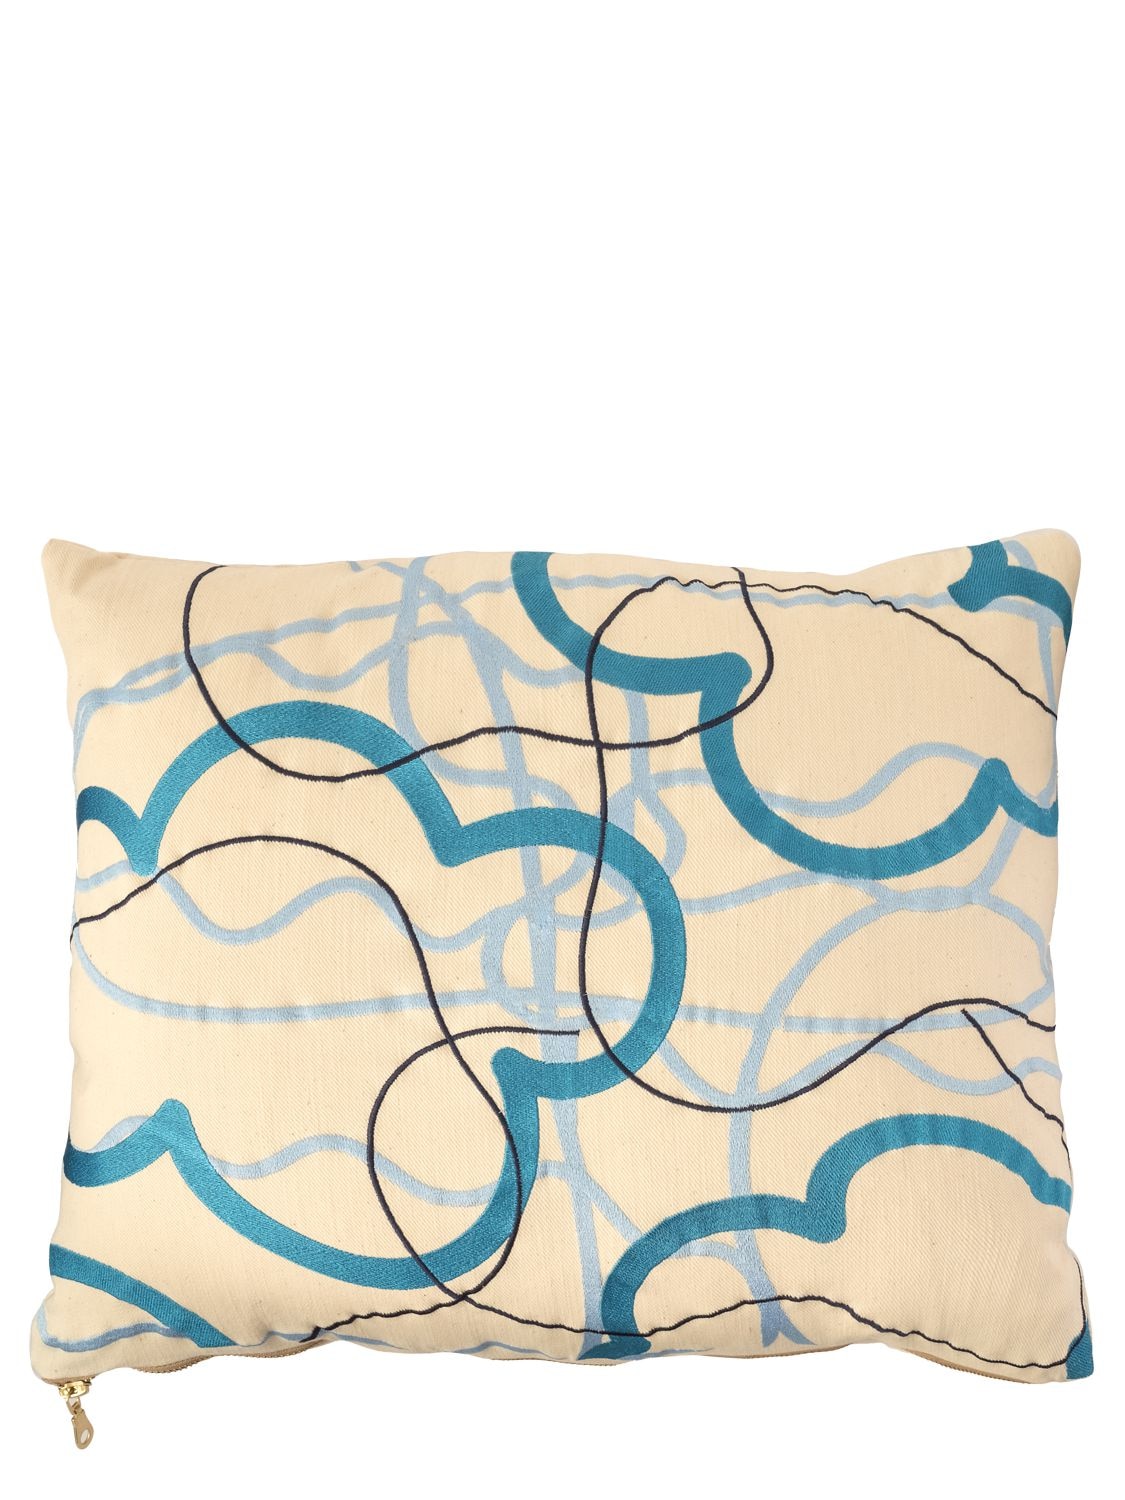 Aricò Nuovola Pillow Exclusively For Lvr In Beige,blue